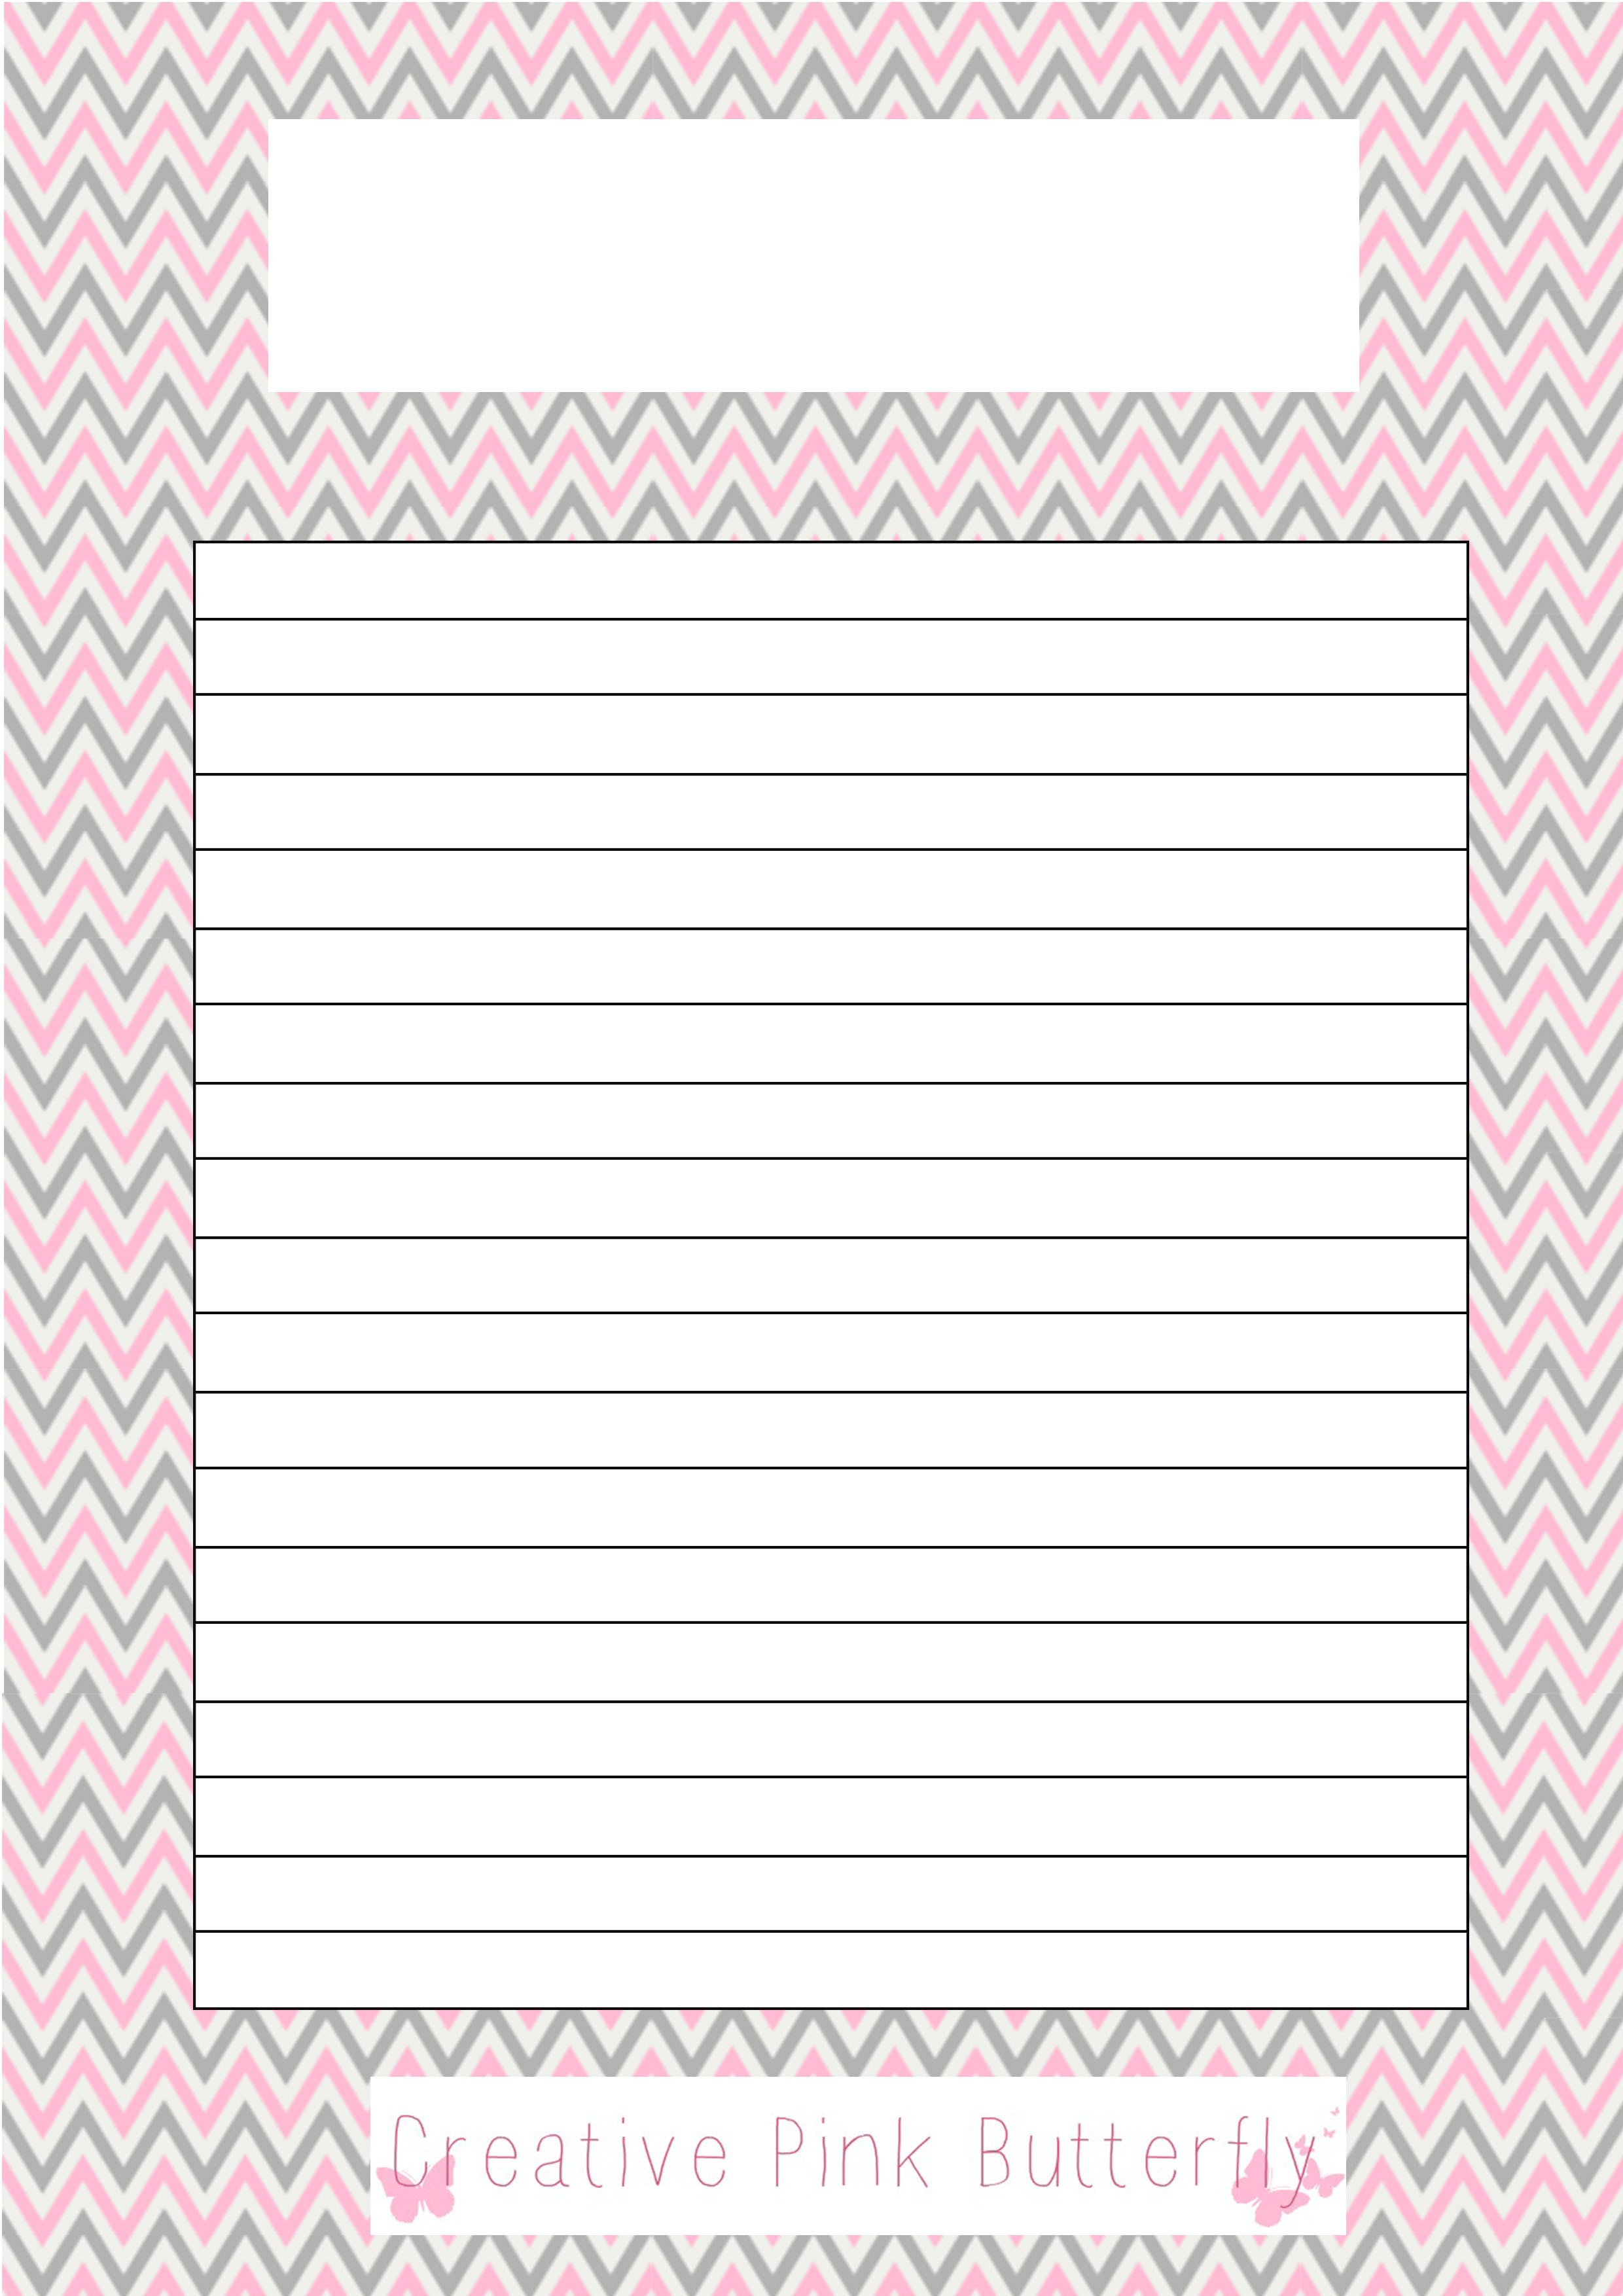 6 Best Images of Printable Blank List Paper - Printable Numbered Lined